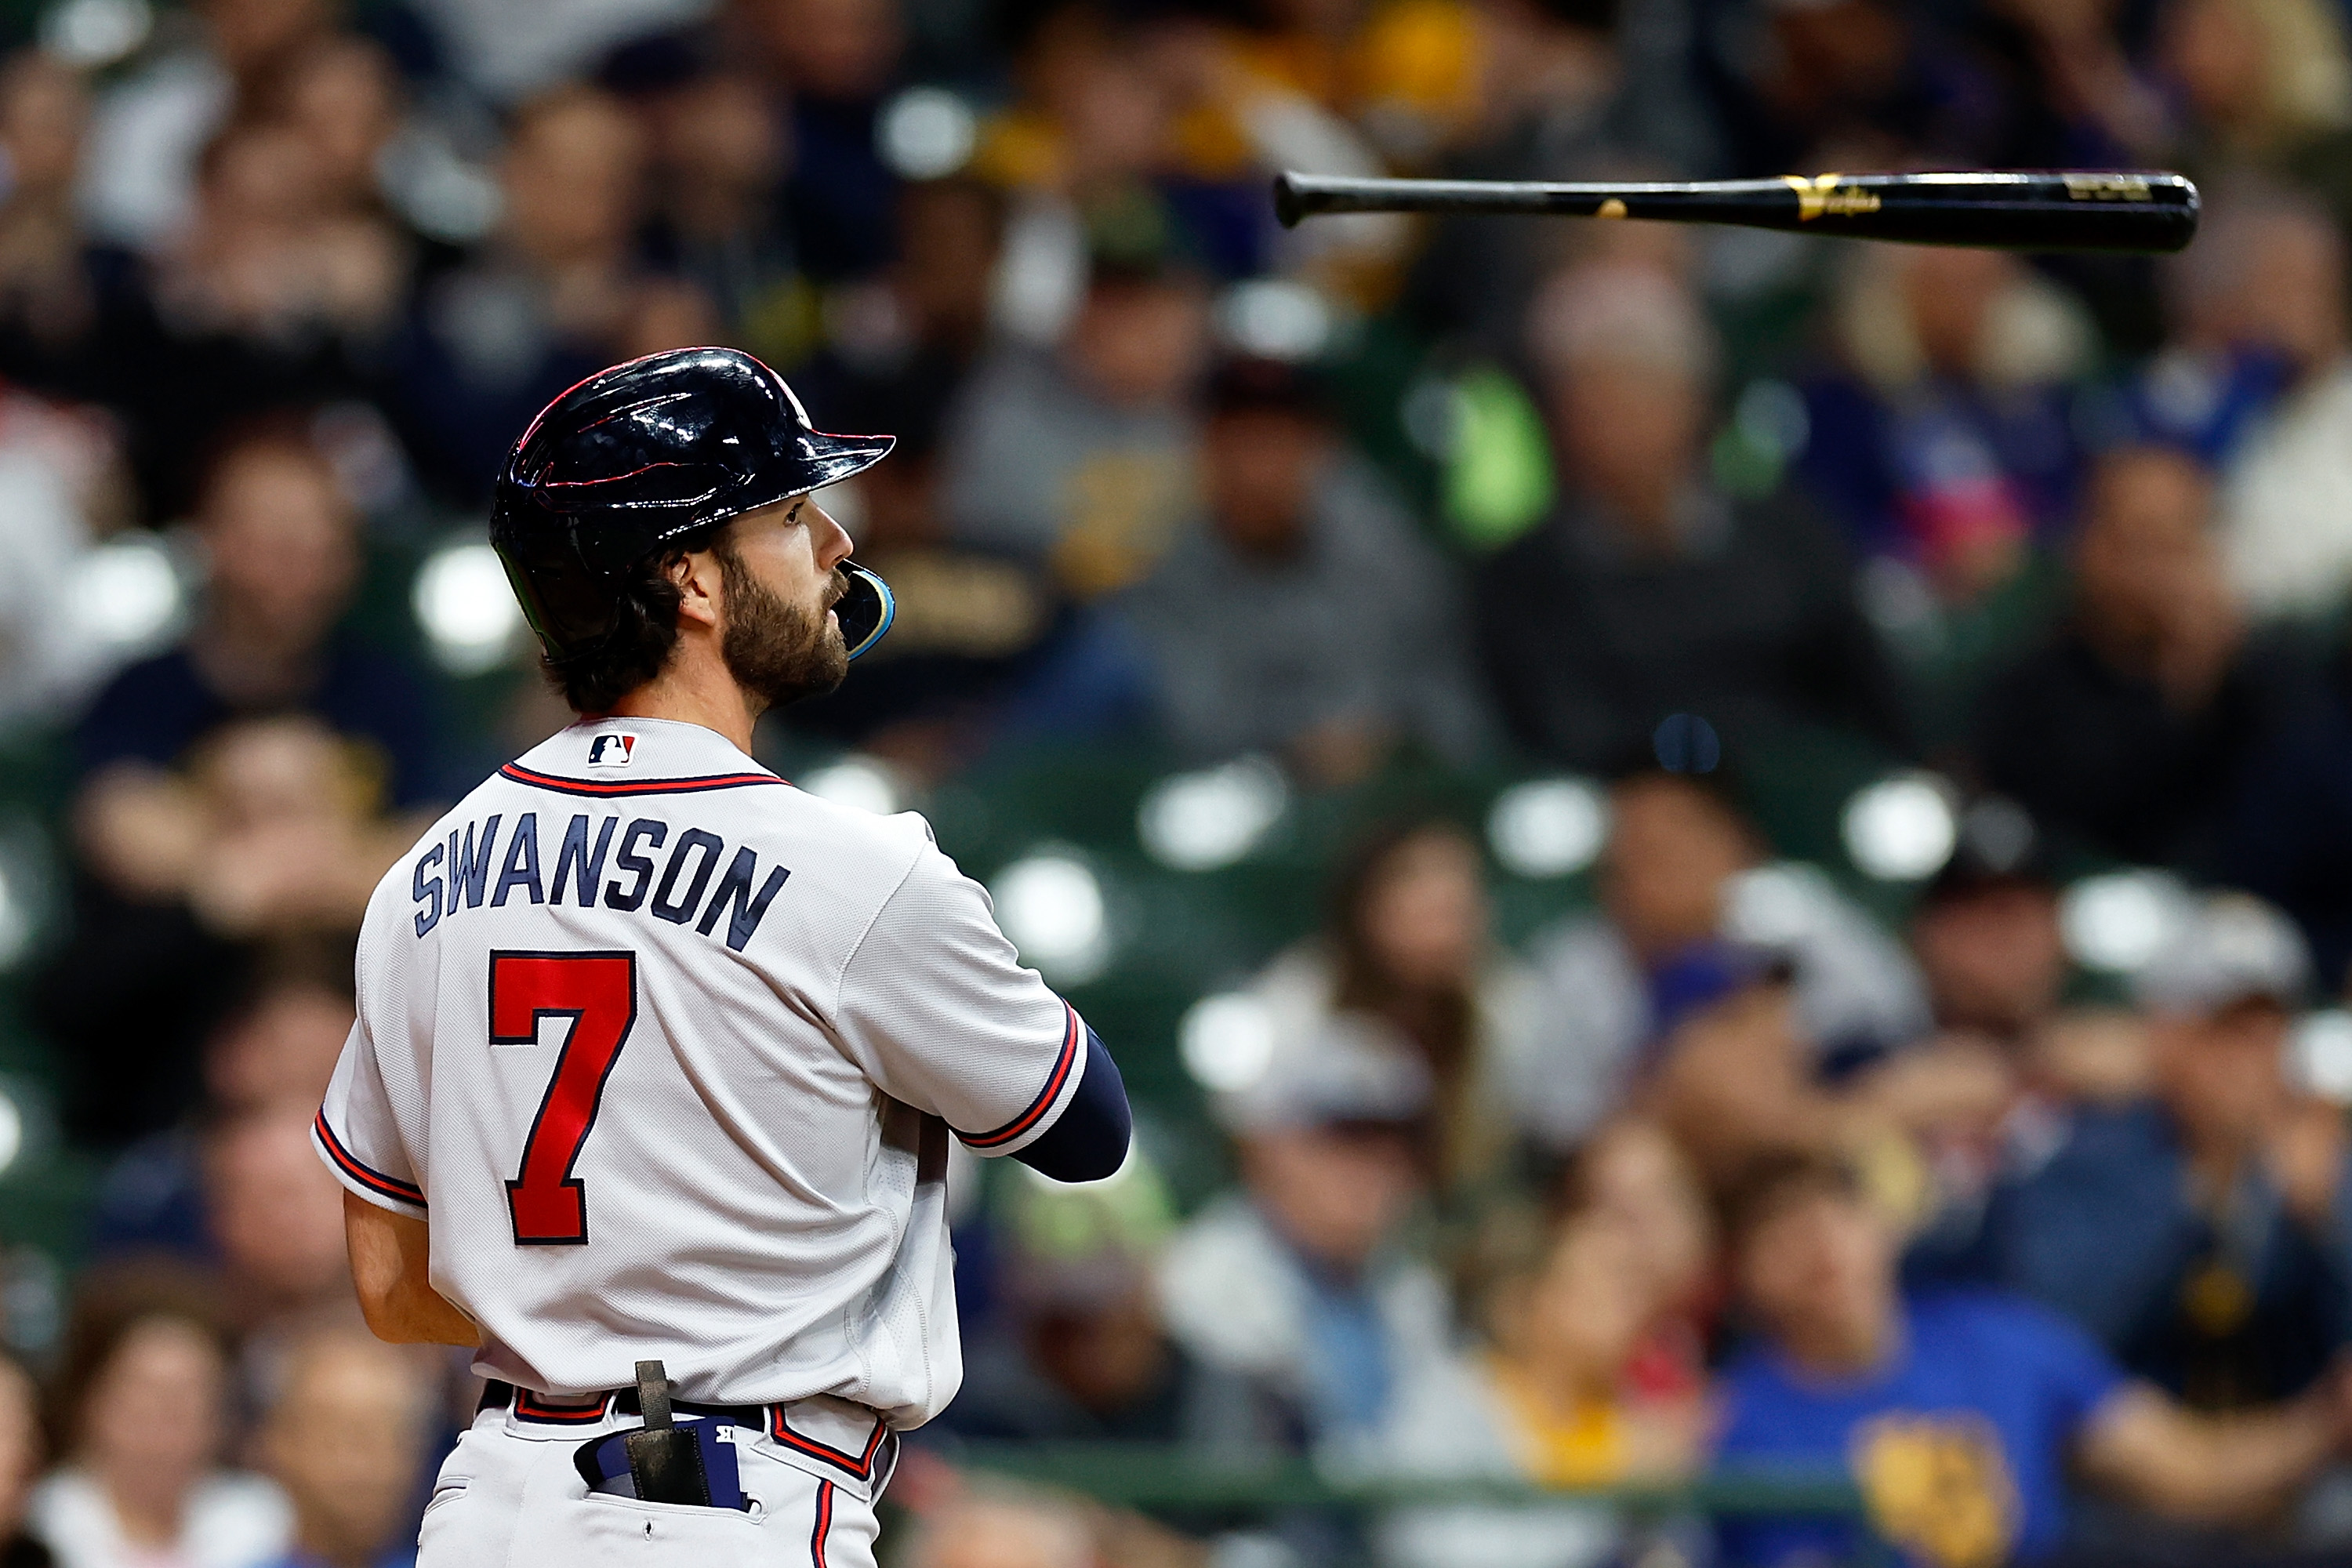 Dansby Swanson is Looking Like One of MLB's Best All-Around